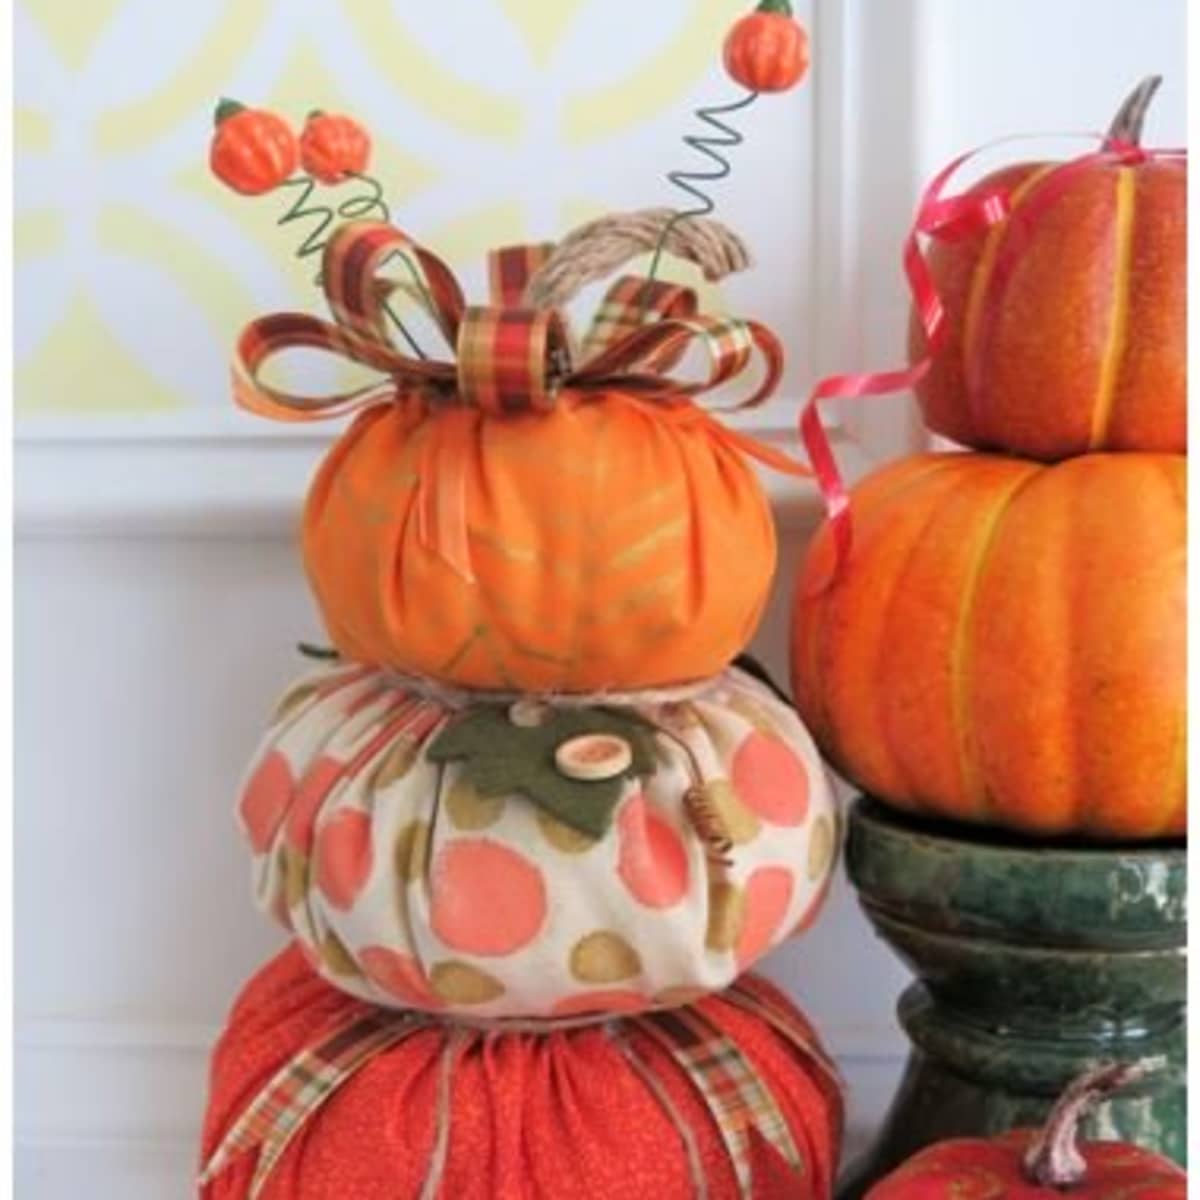 How to Make a Fabric Pumpkin Topiary - FeltMagnet